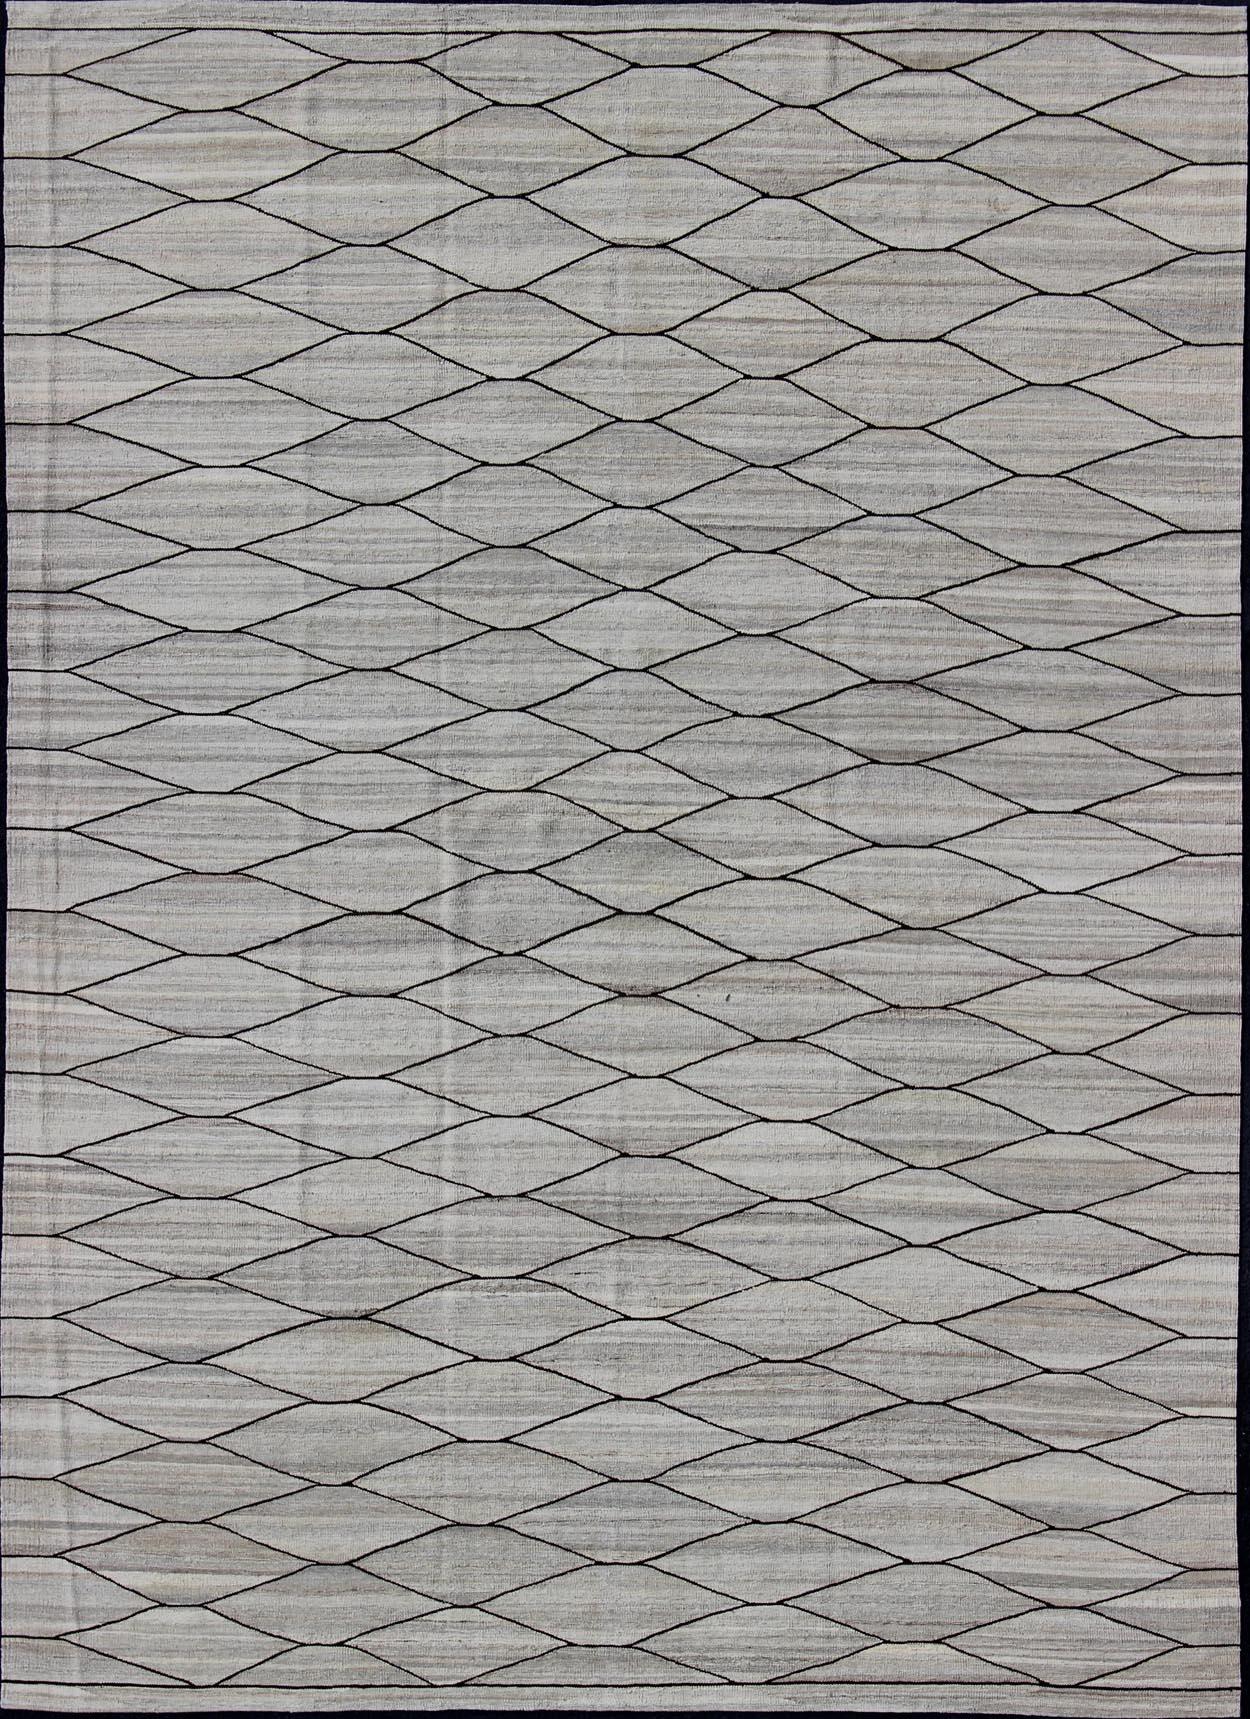 Hand-Woven Natural Color Tone Hand Woven Flat-Weave Kilim  For Sale